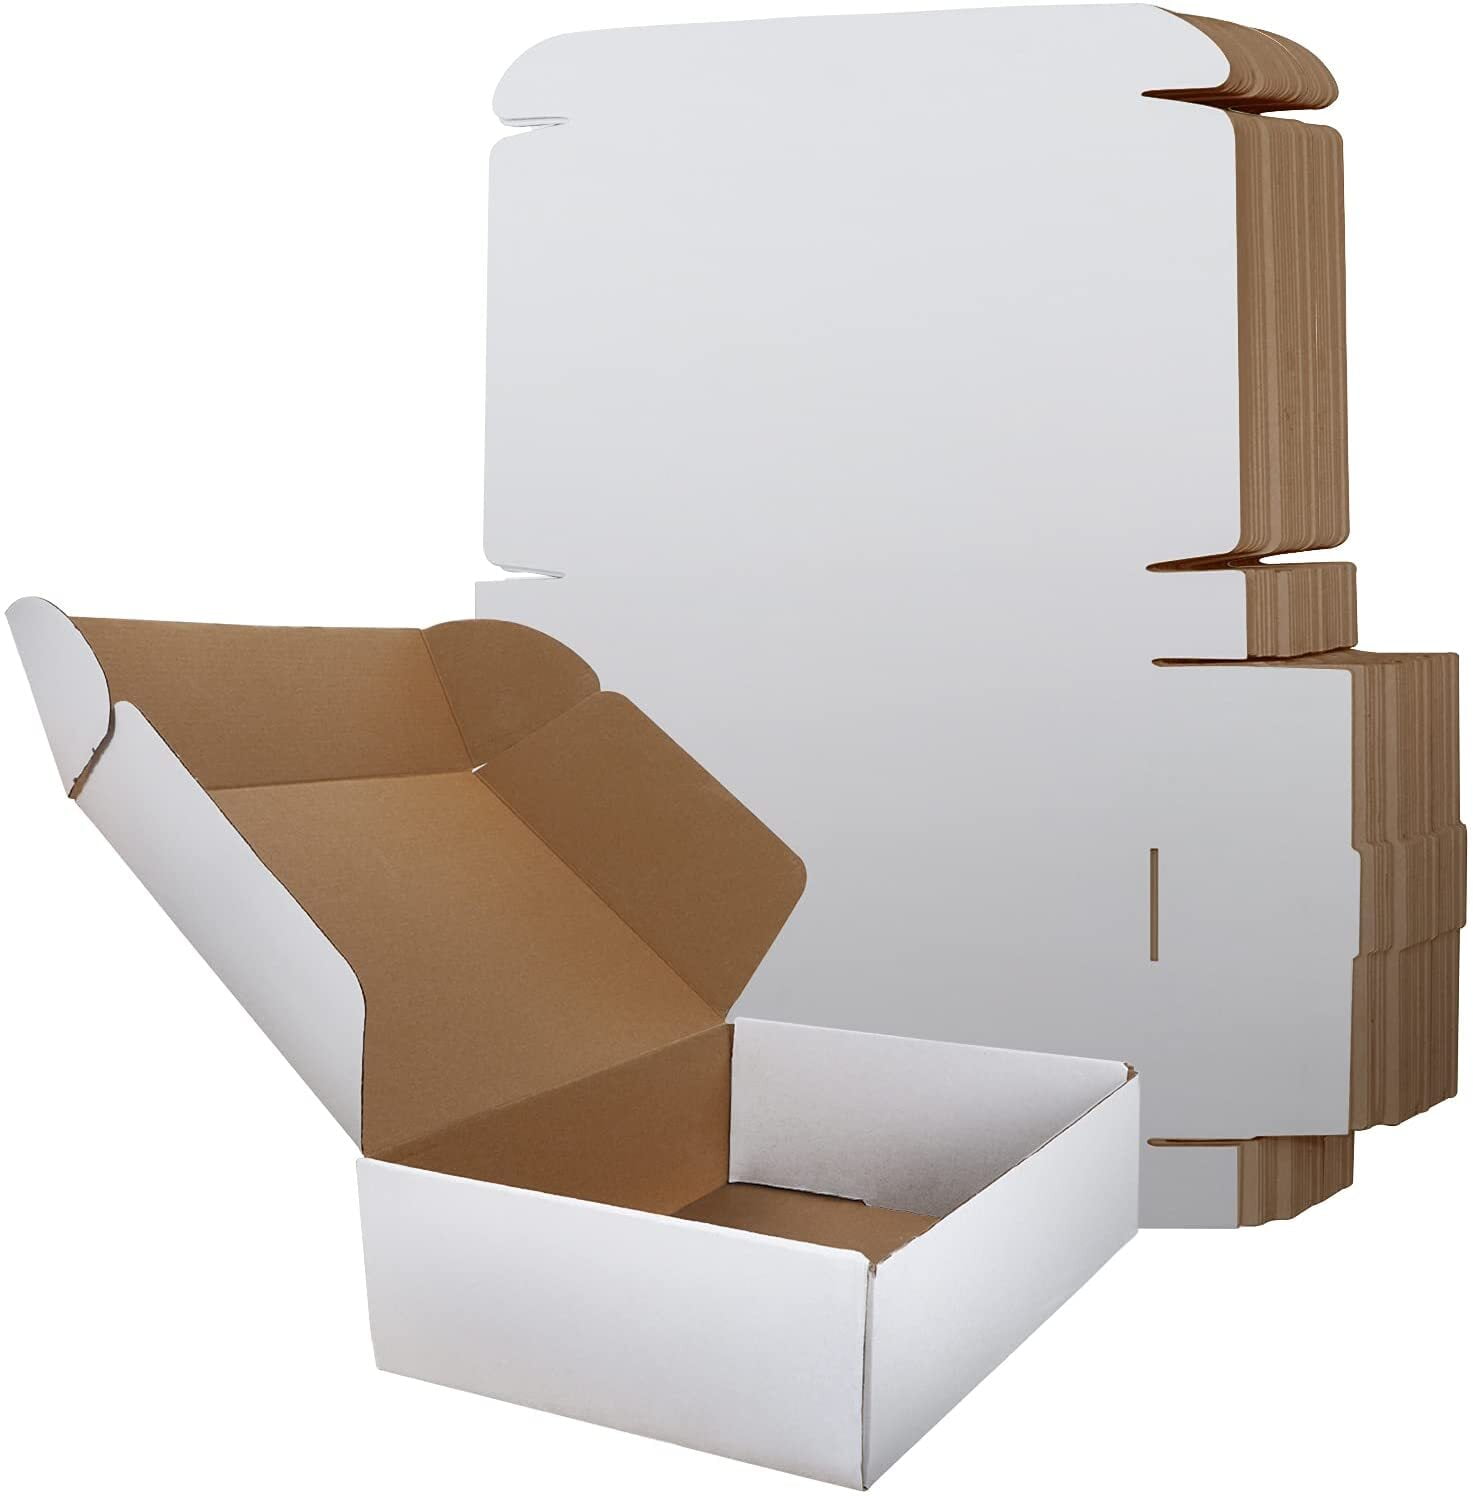 Small White Shipping Boxes For Small Business 12x8x2 Inches,Pack Of 12,Corrugated Cardboard Boxes For Shipping,Packaging,Storage,Craft Gifts Giving 